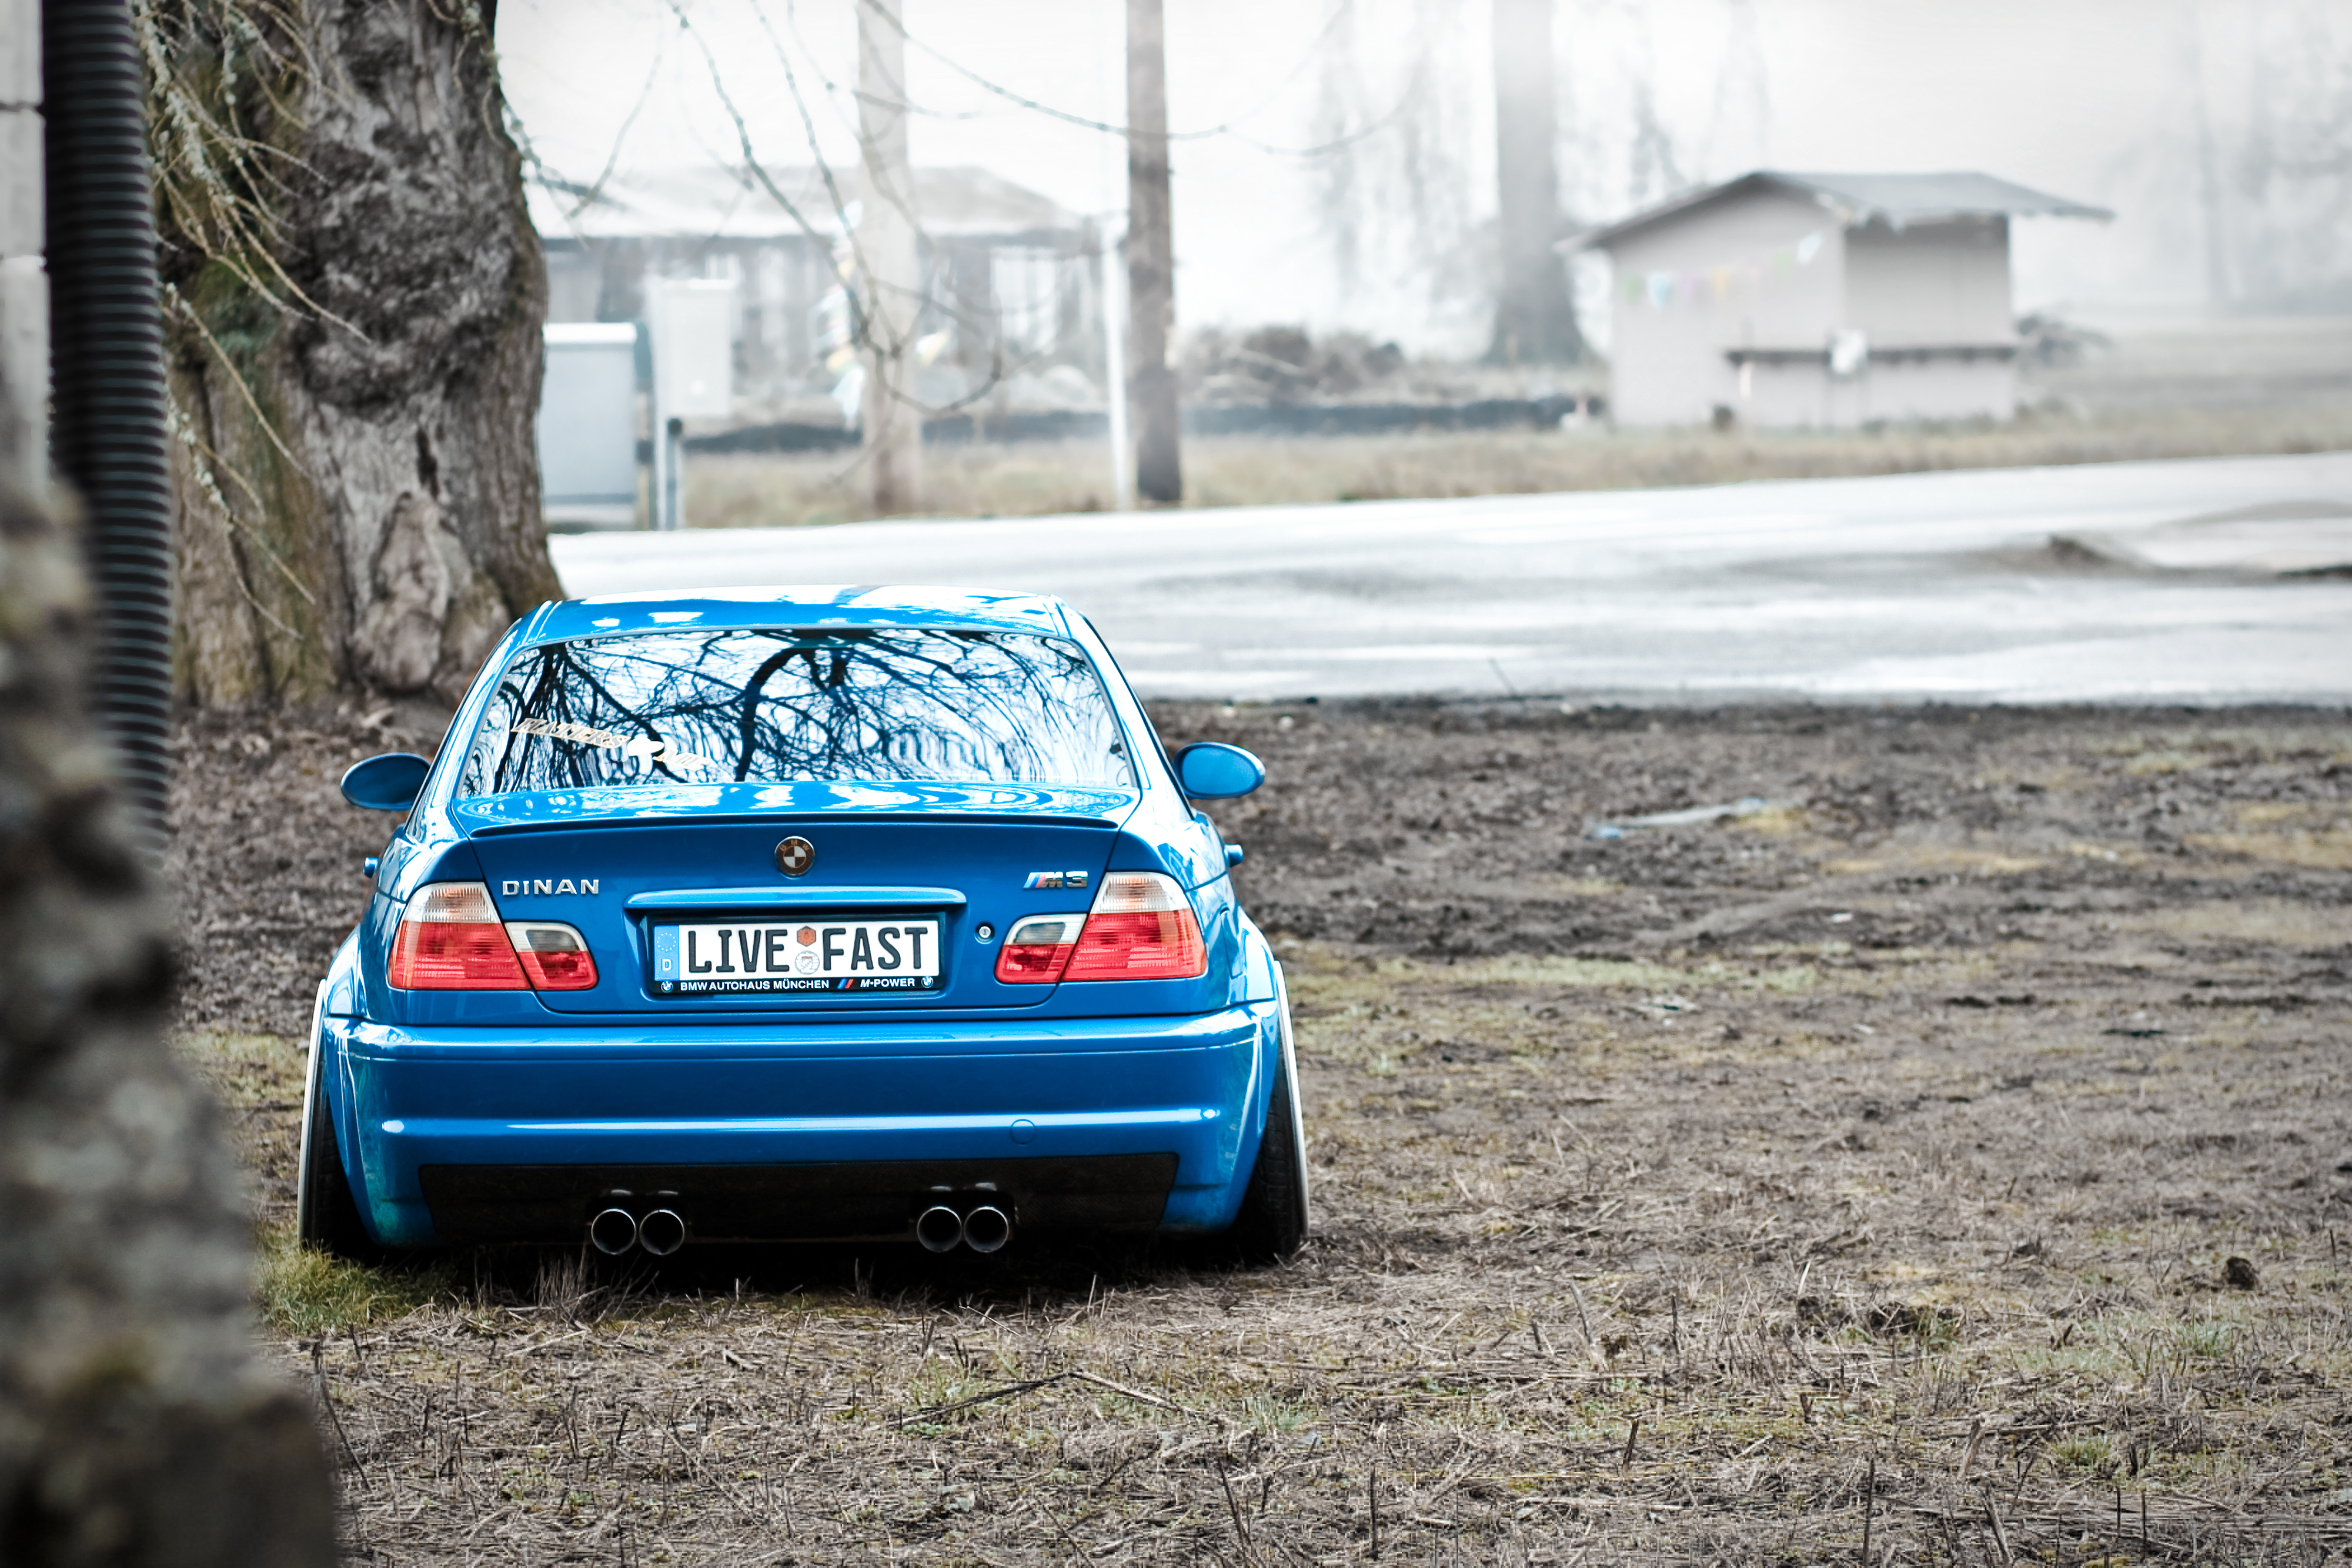 210+ BMW M3 HD Wallpapers and Backgrounds